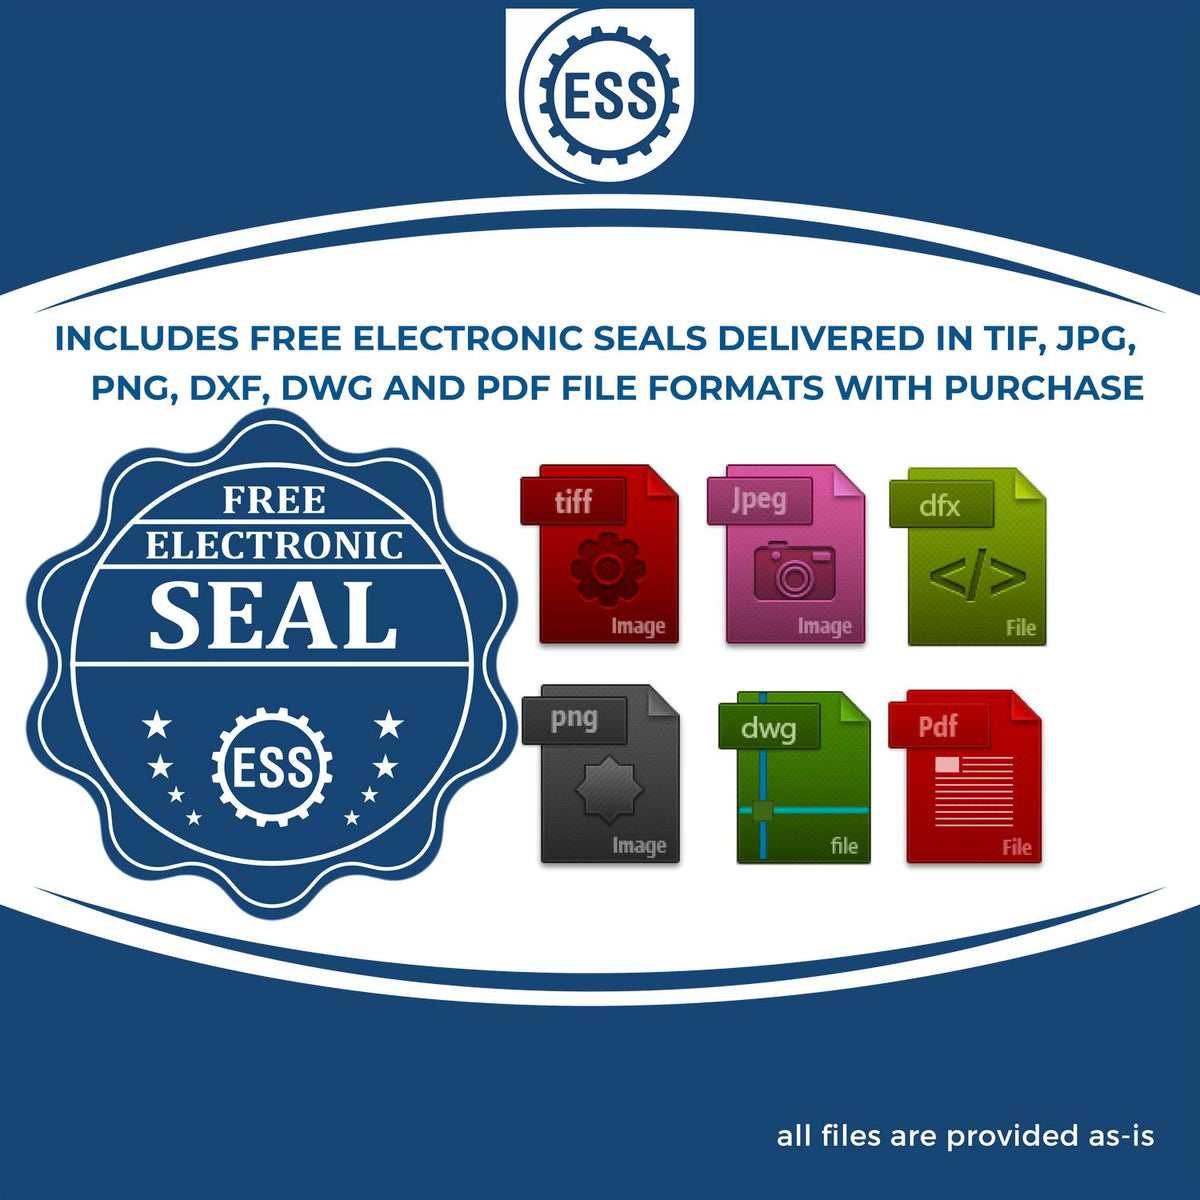 An infographic for the free electronic seal for the Gift Ohio Landscape Architect Seal illustrating the different file type icons such as DXF, DWG, TIF, JPG and PNG.